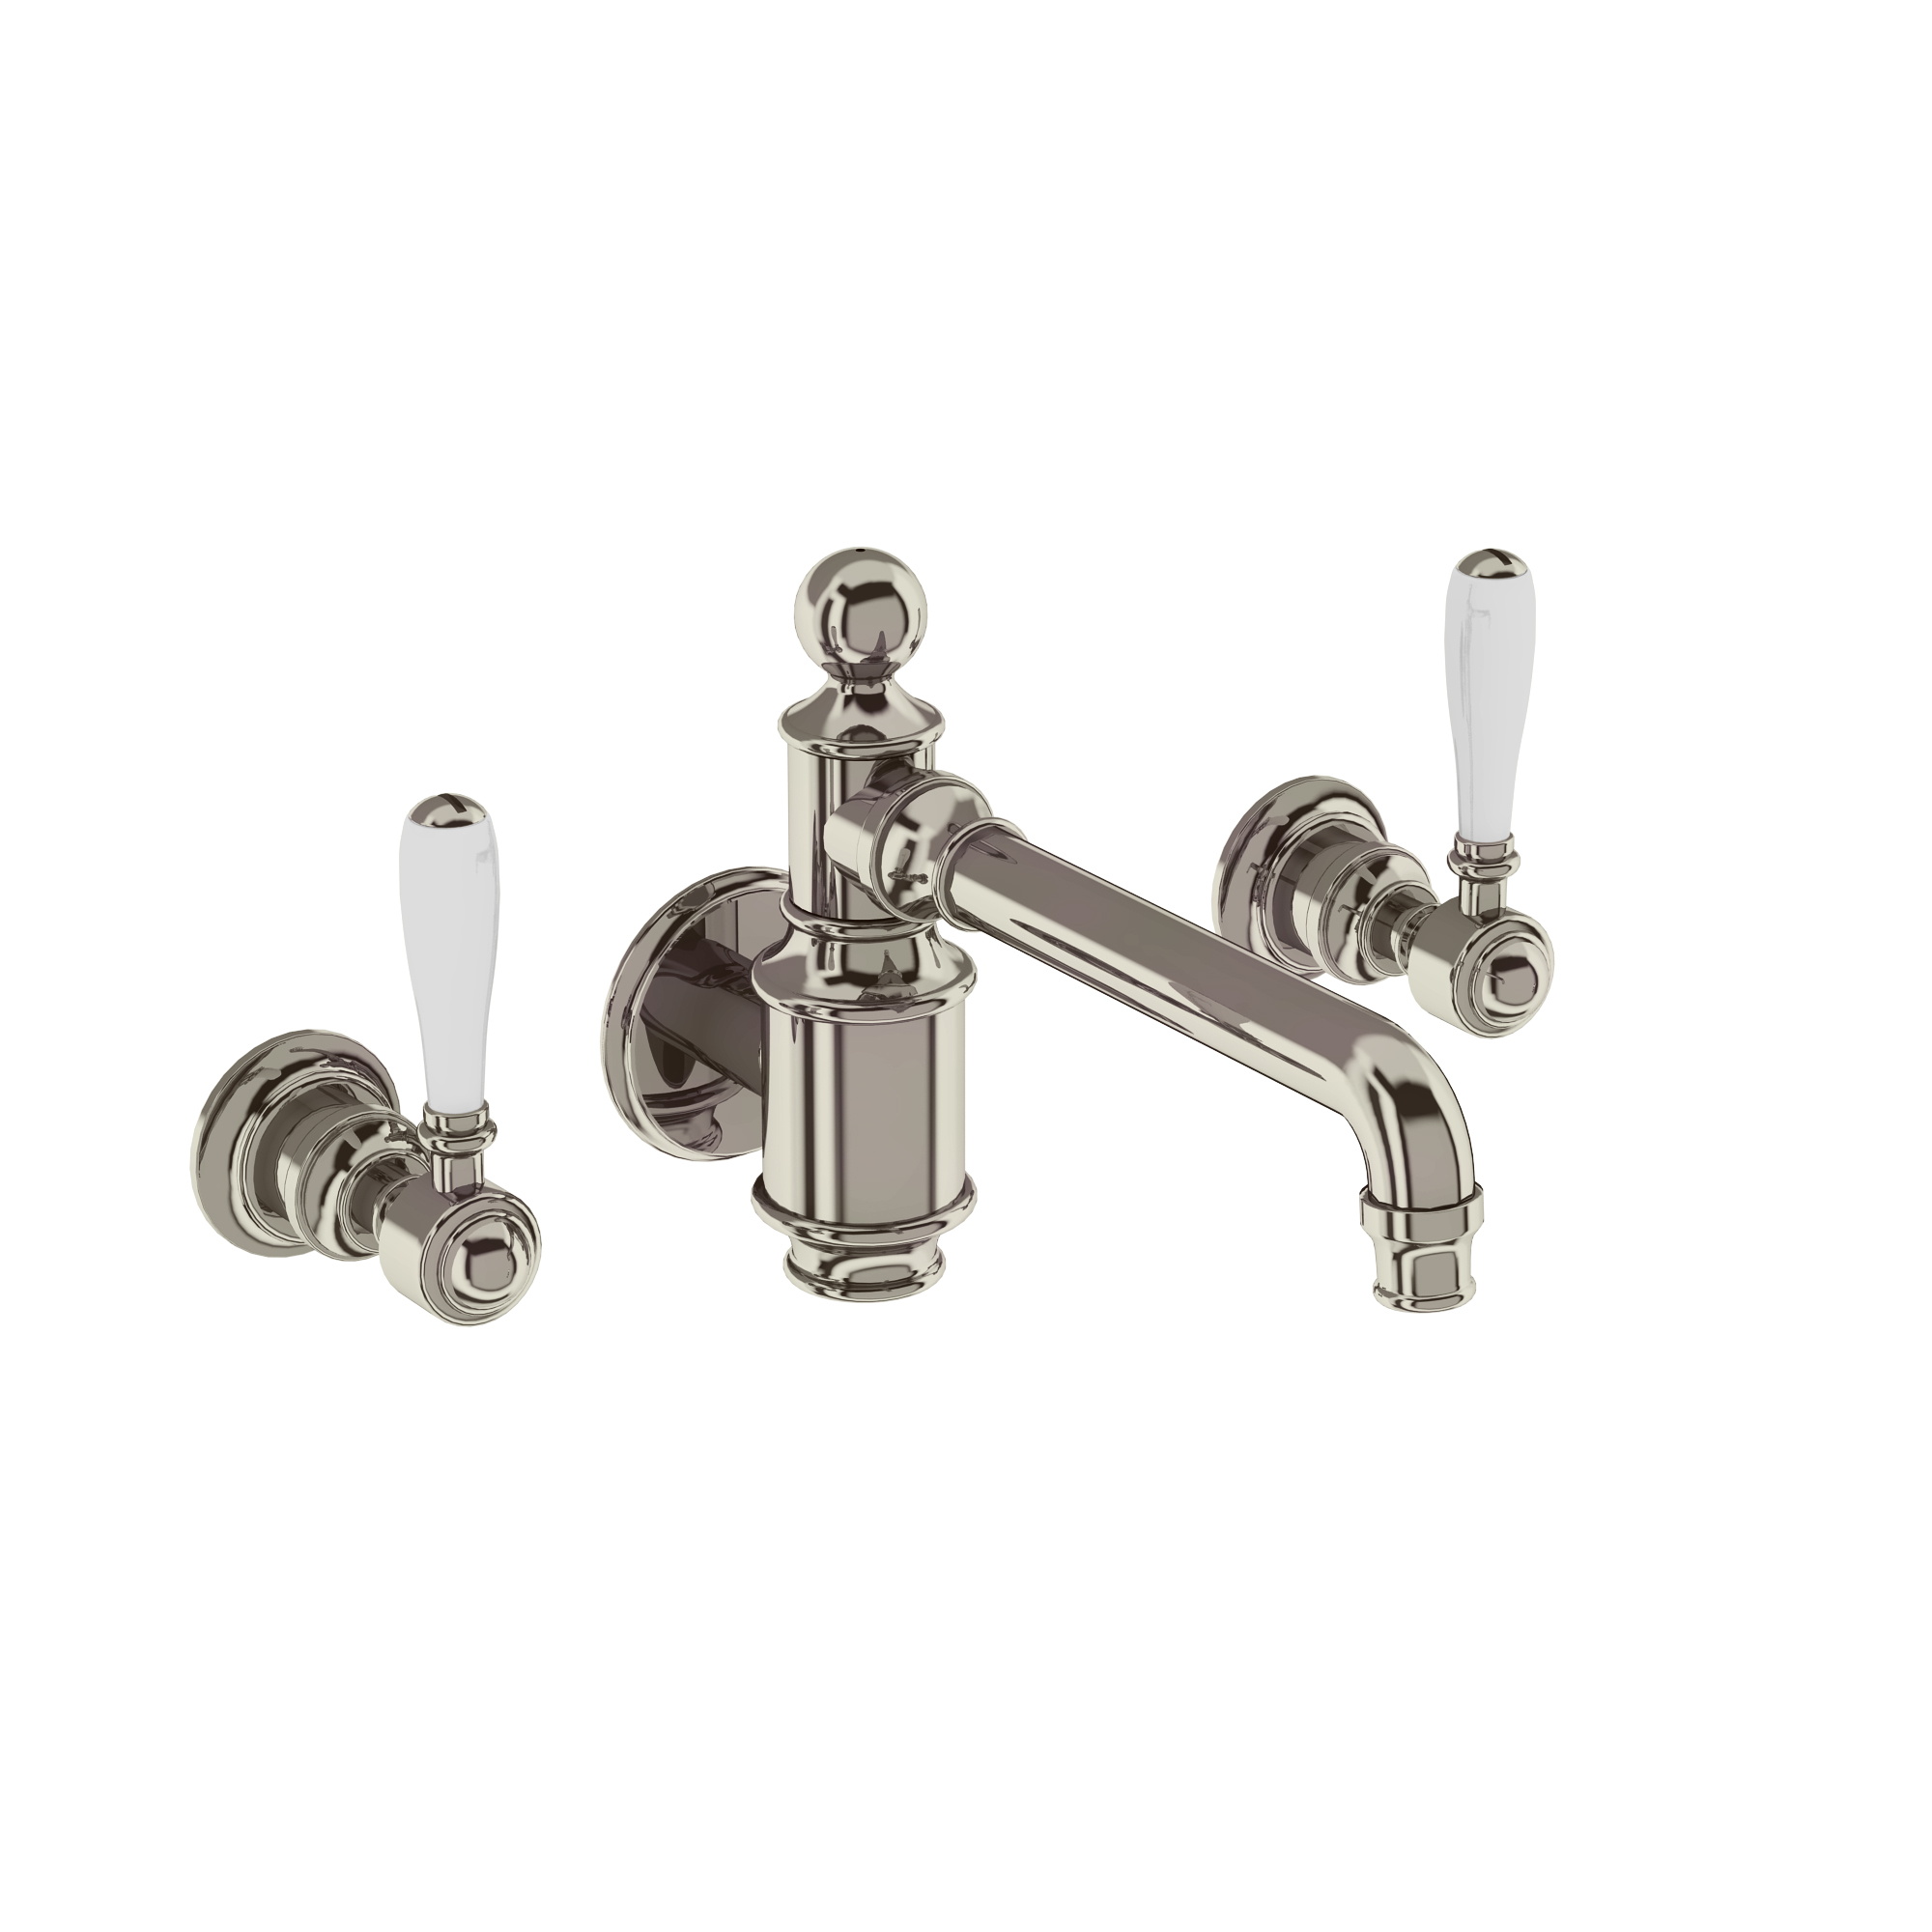 Arcade Three hole basin mixer wall-mounted without pop up waste - nickel - with ceramic lever